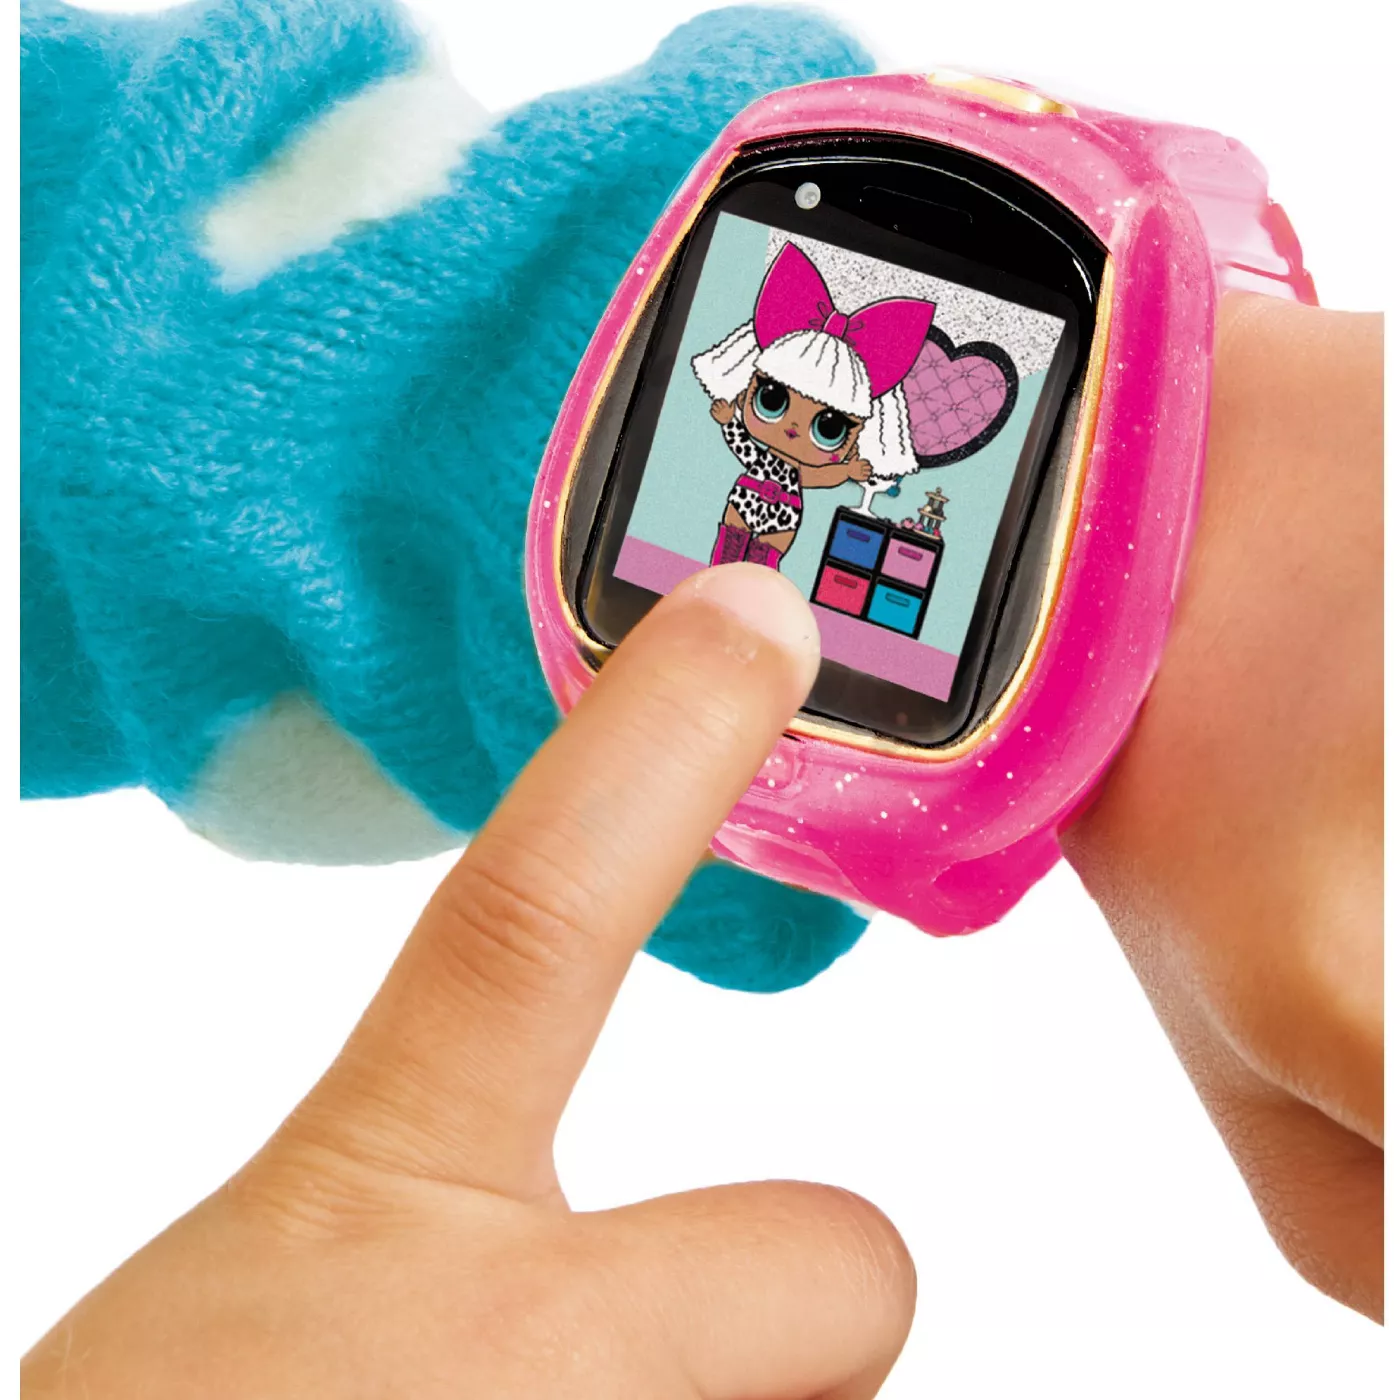 Primary image for L.O.L. Surprise! Smartwatch! Pink -  Camera, Video, Games, Activities and More